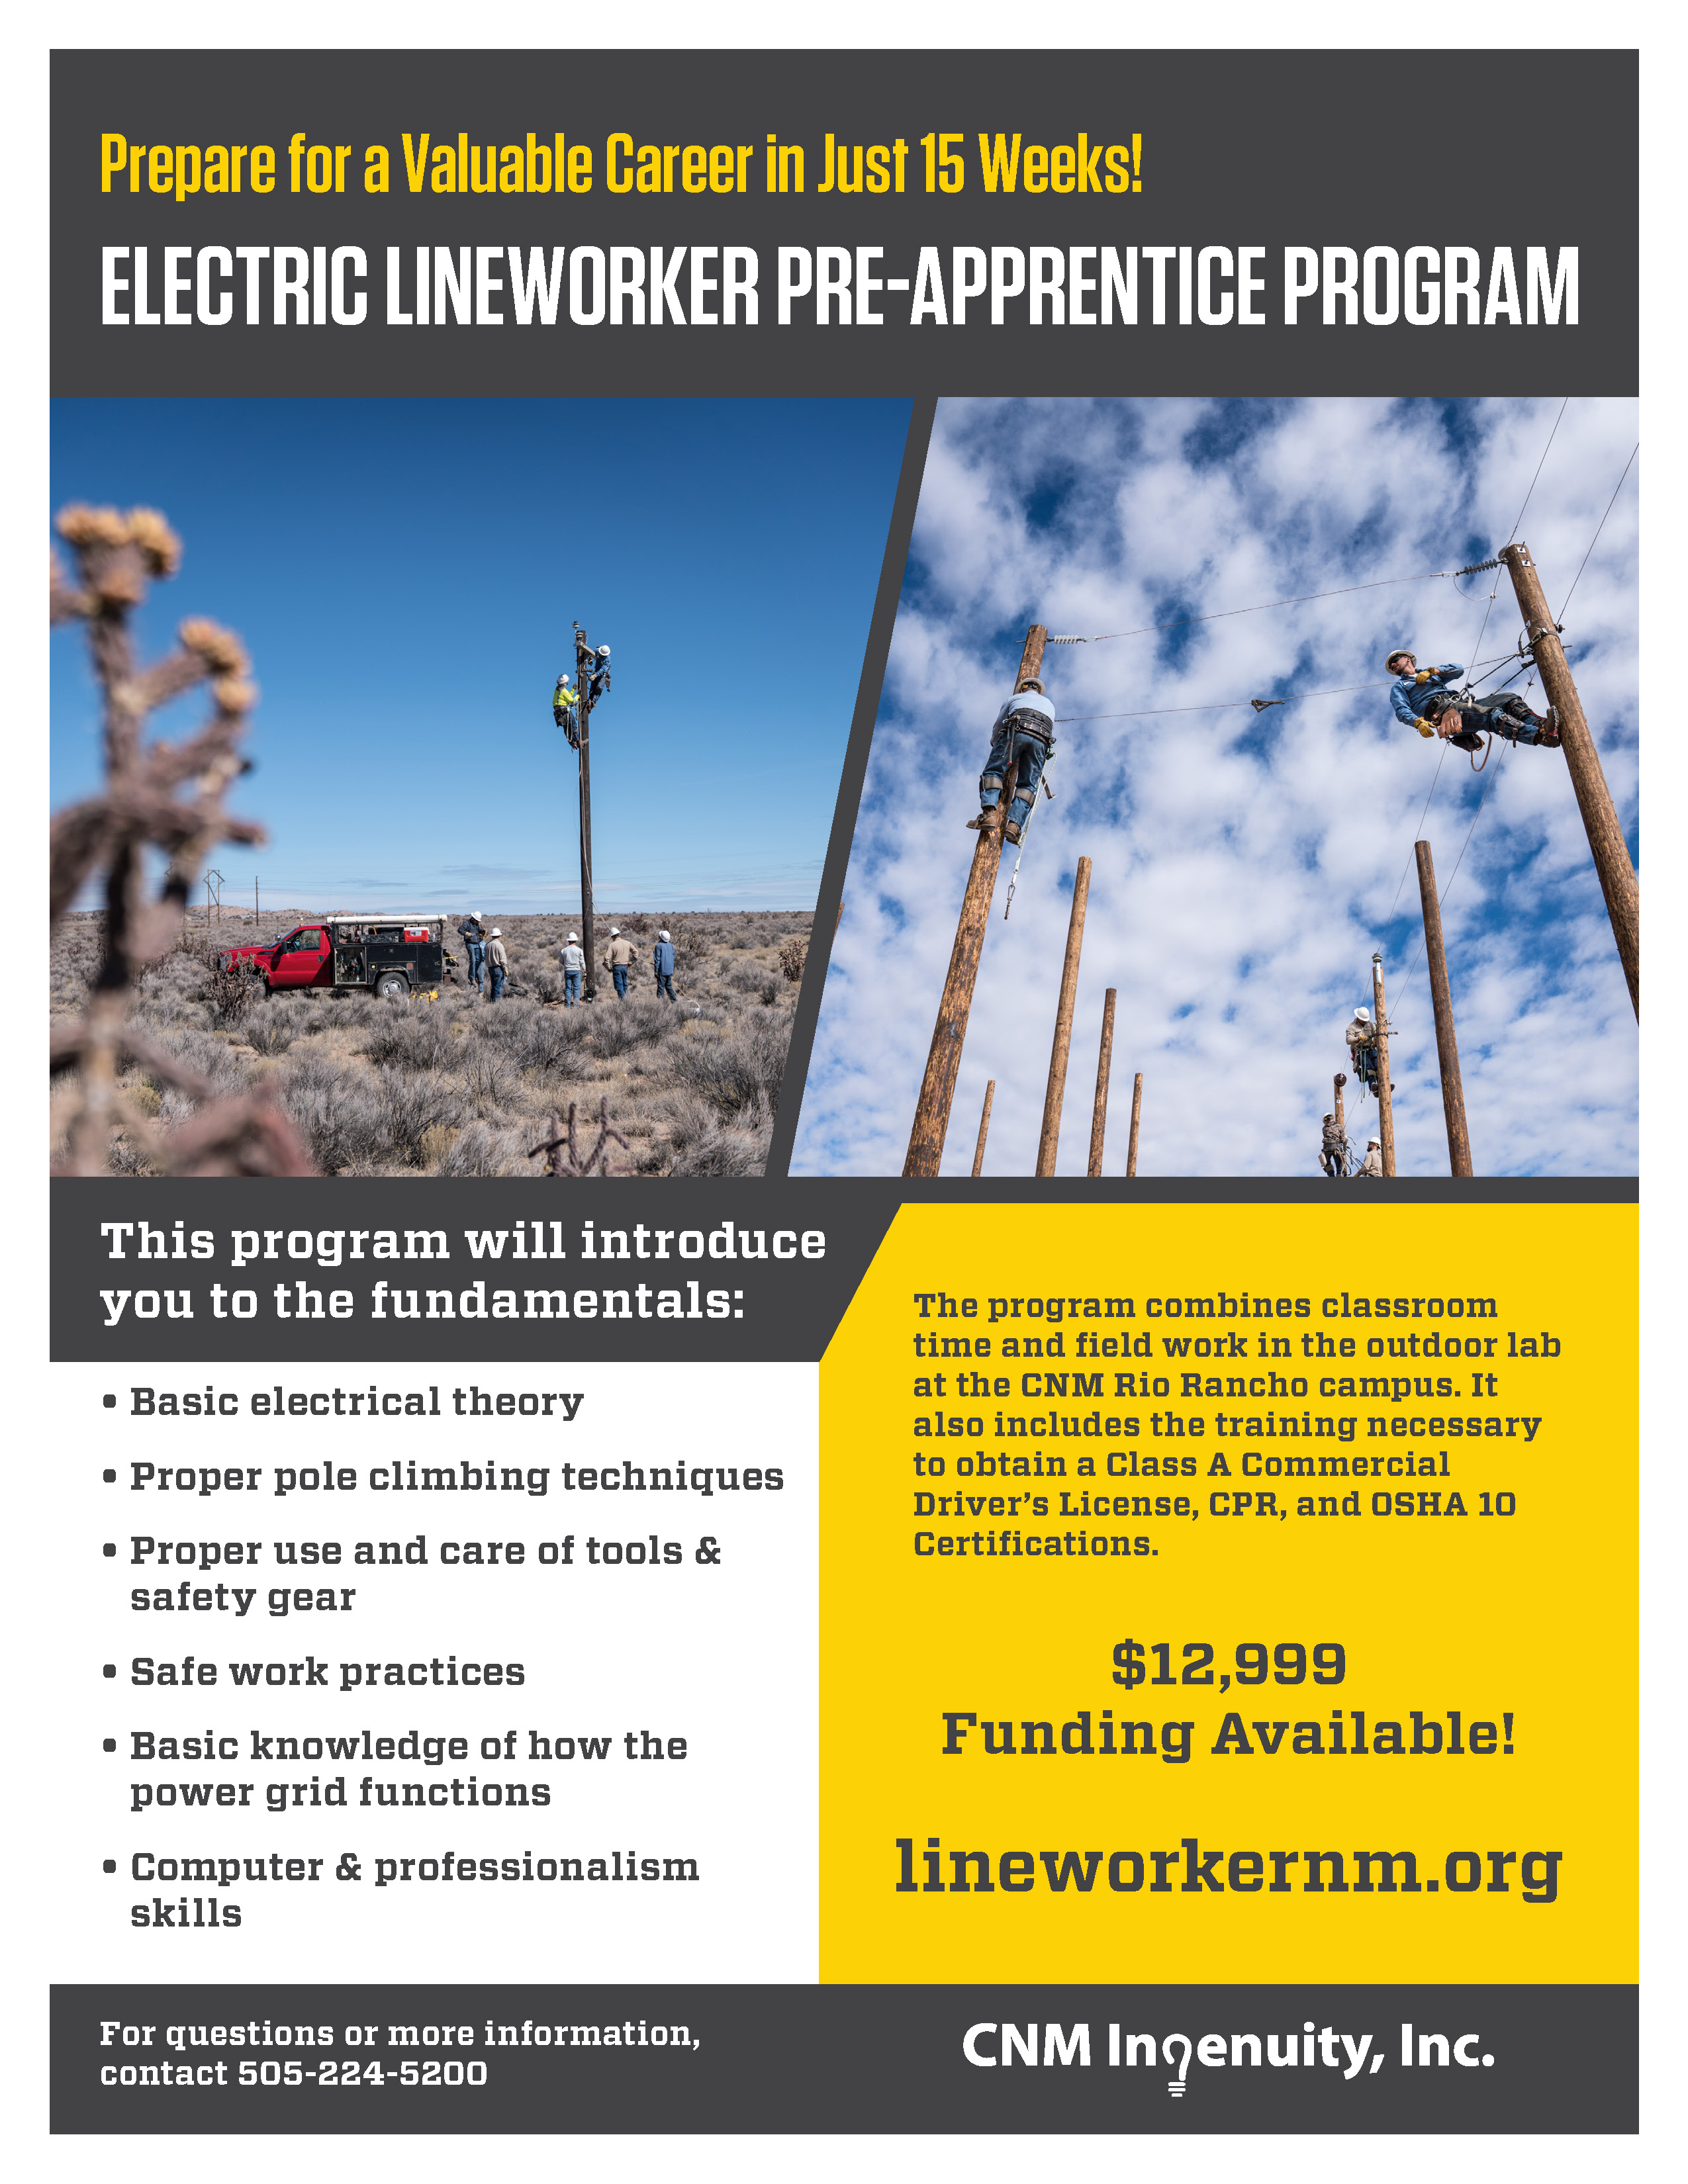 cnm-lineworker-scholarship-otero-county-electric-cooperative-inc